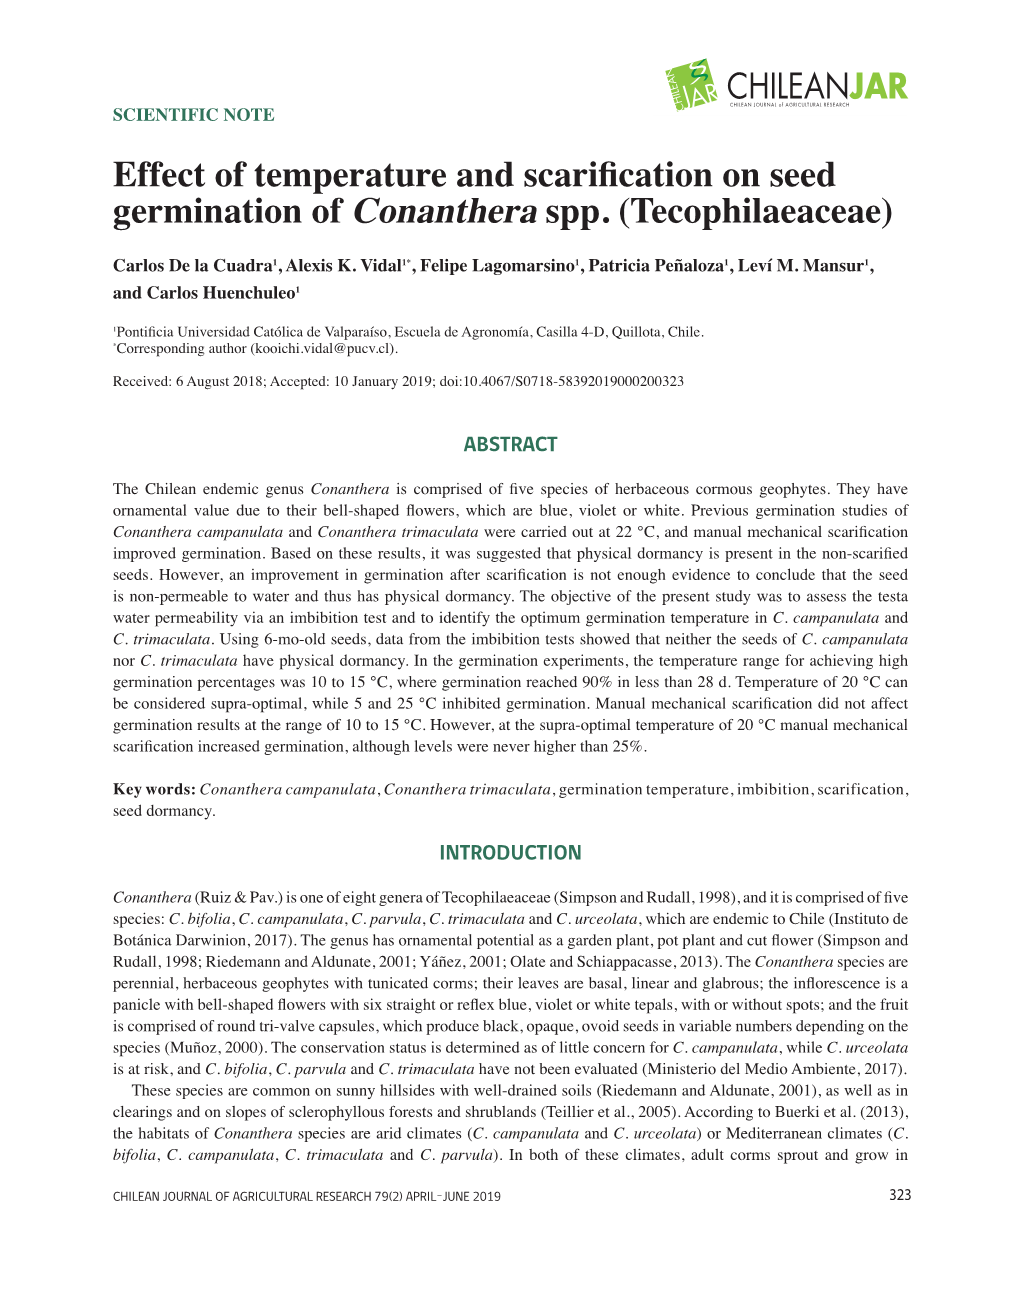 Effect of Temperature and Scarification on Seed Germination of Conanthera Spp